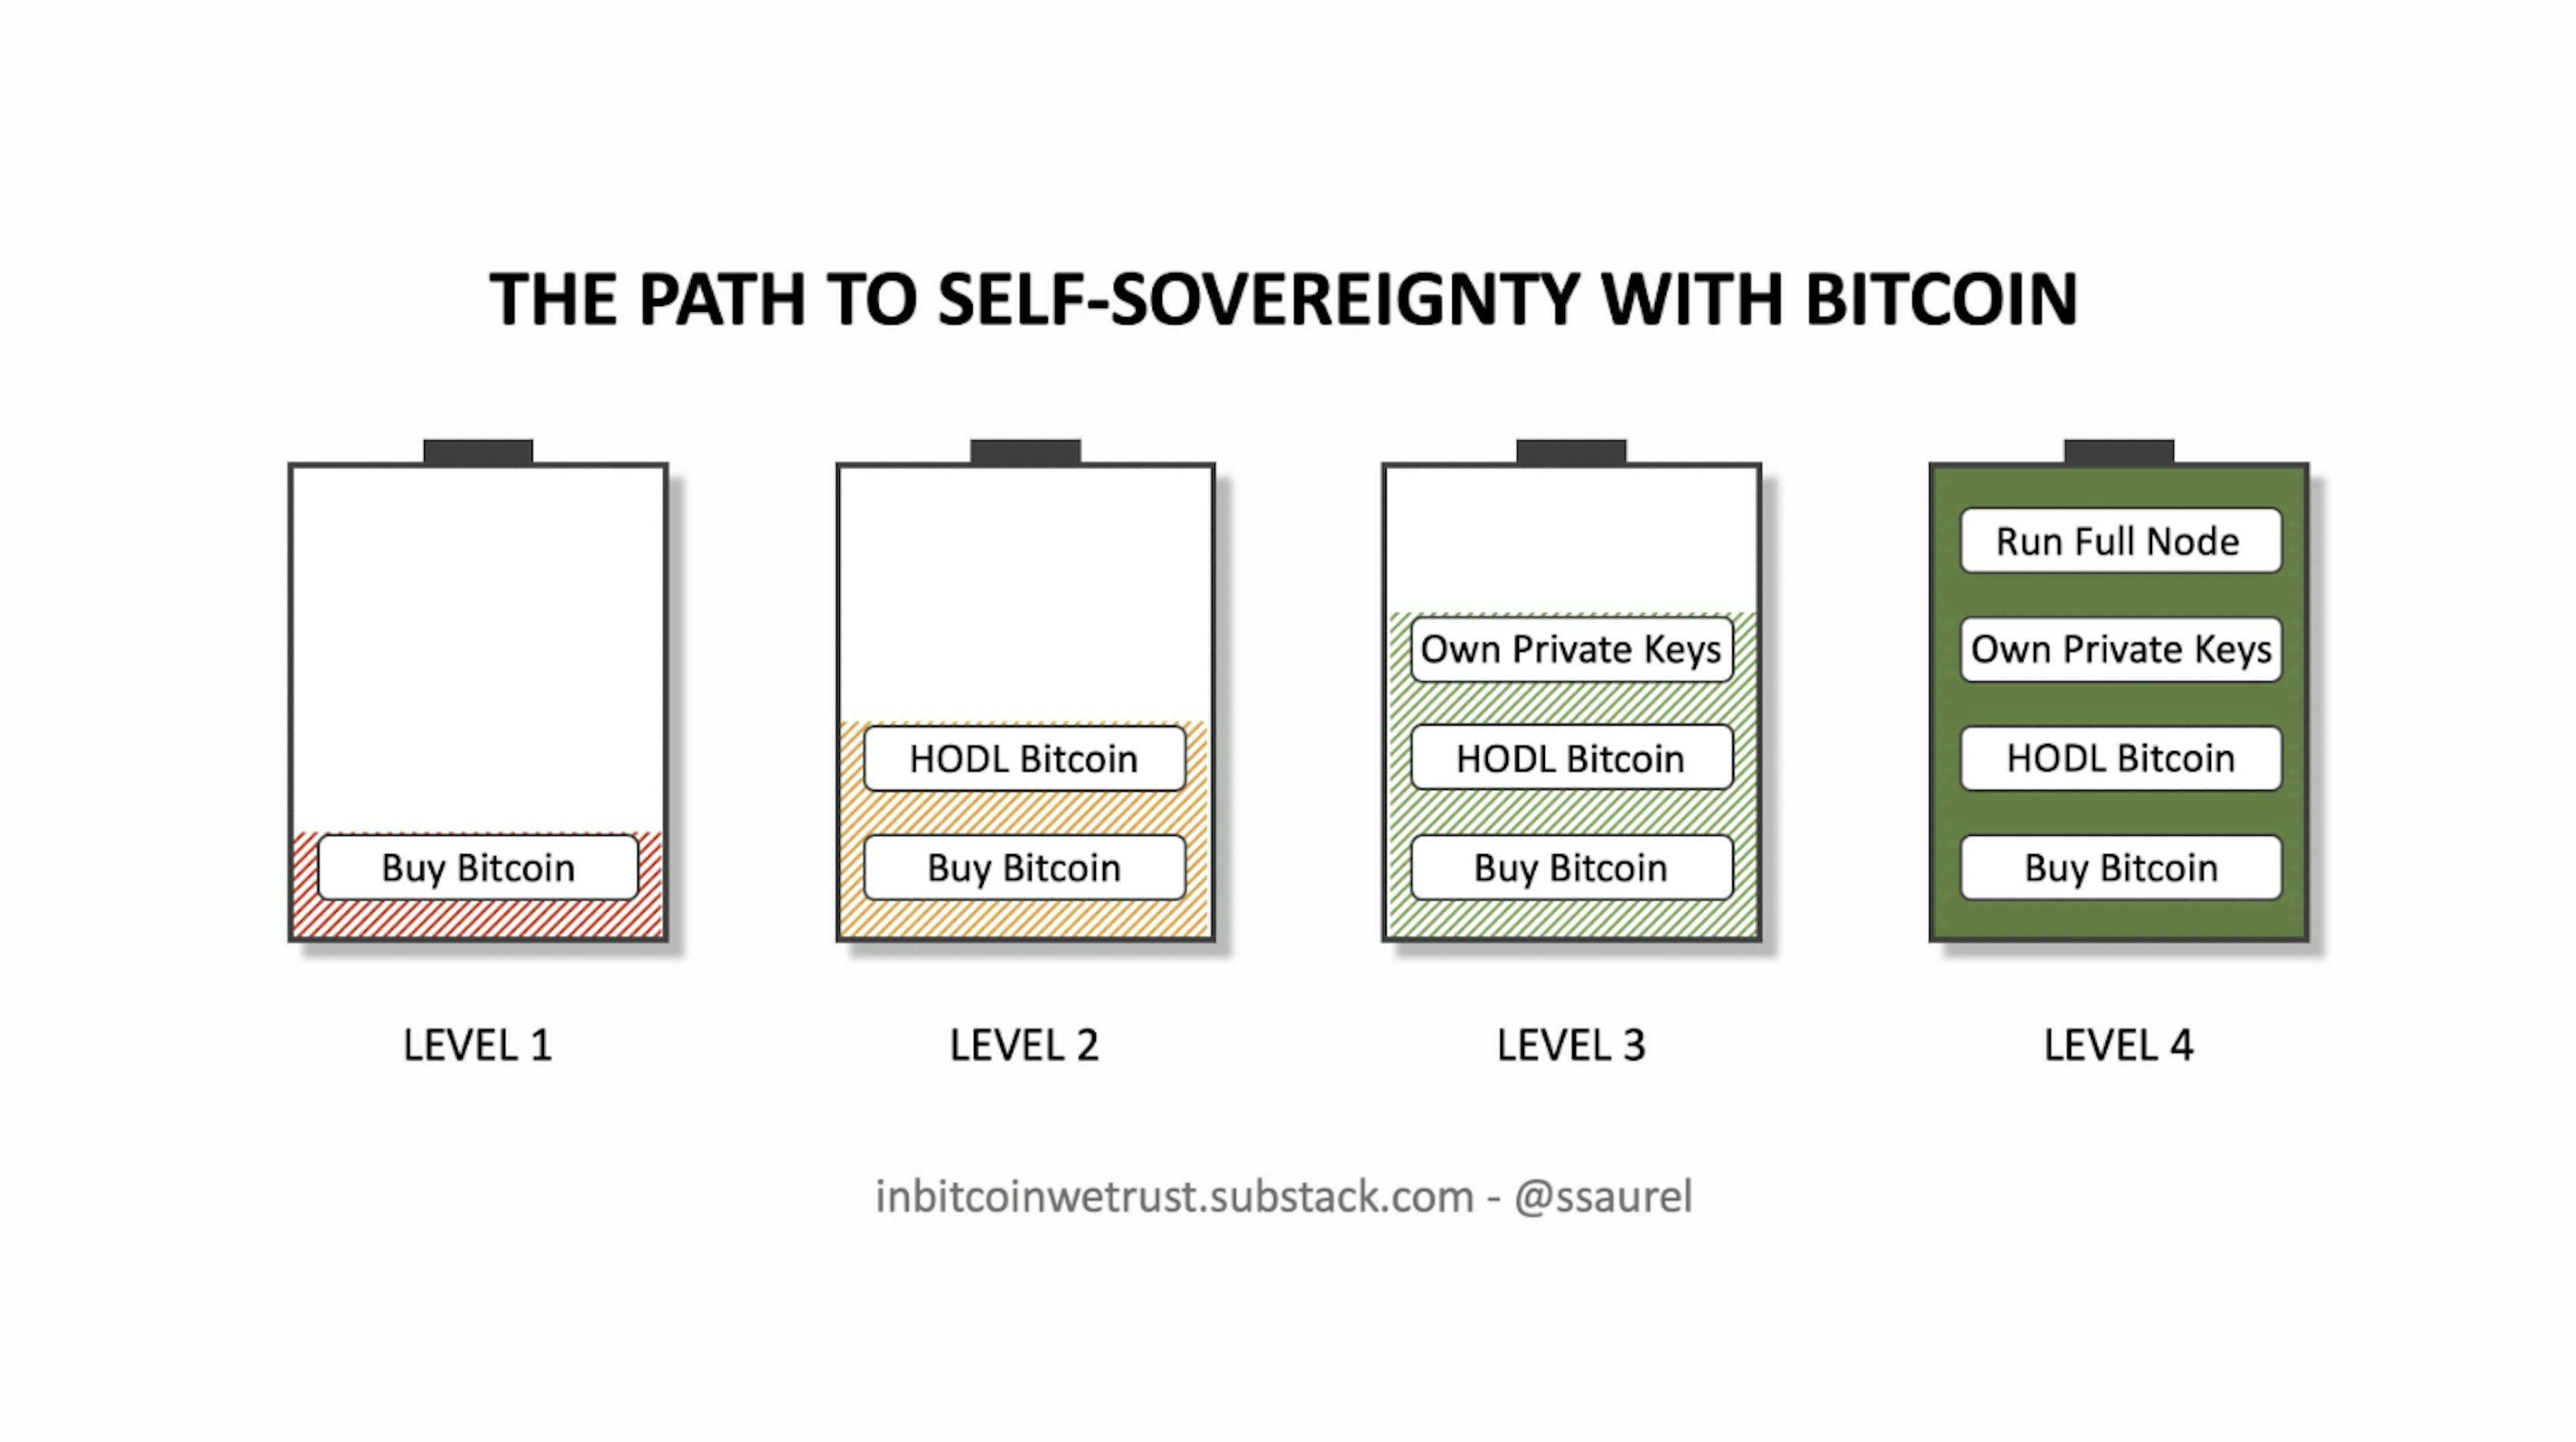 featured image - Can You Achieve Self-Sovereignty With Bitcoin?: There are Four Levels to This